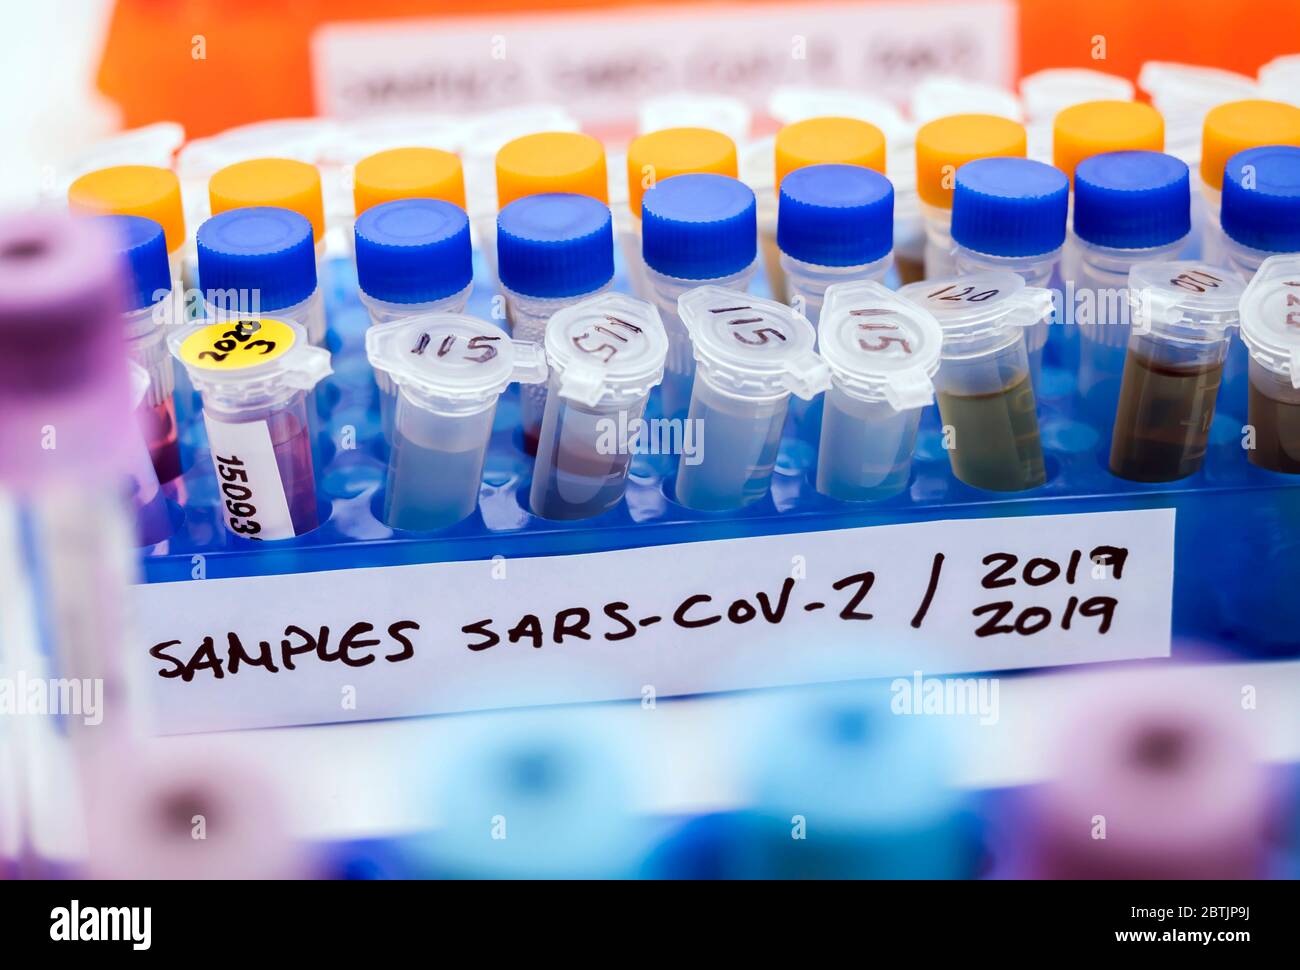 Vials with samples of SARS-COV-2 Covid-19 in a research laboratory, conceptual image Stock Photo